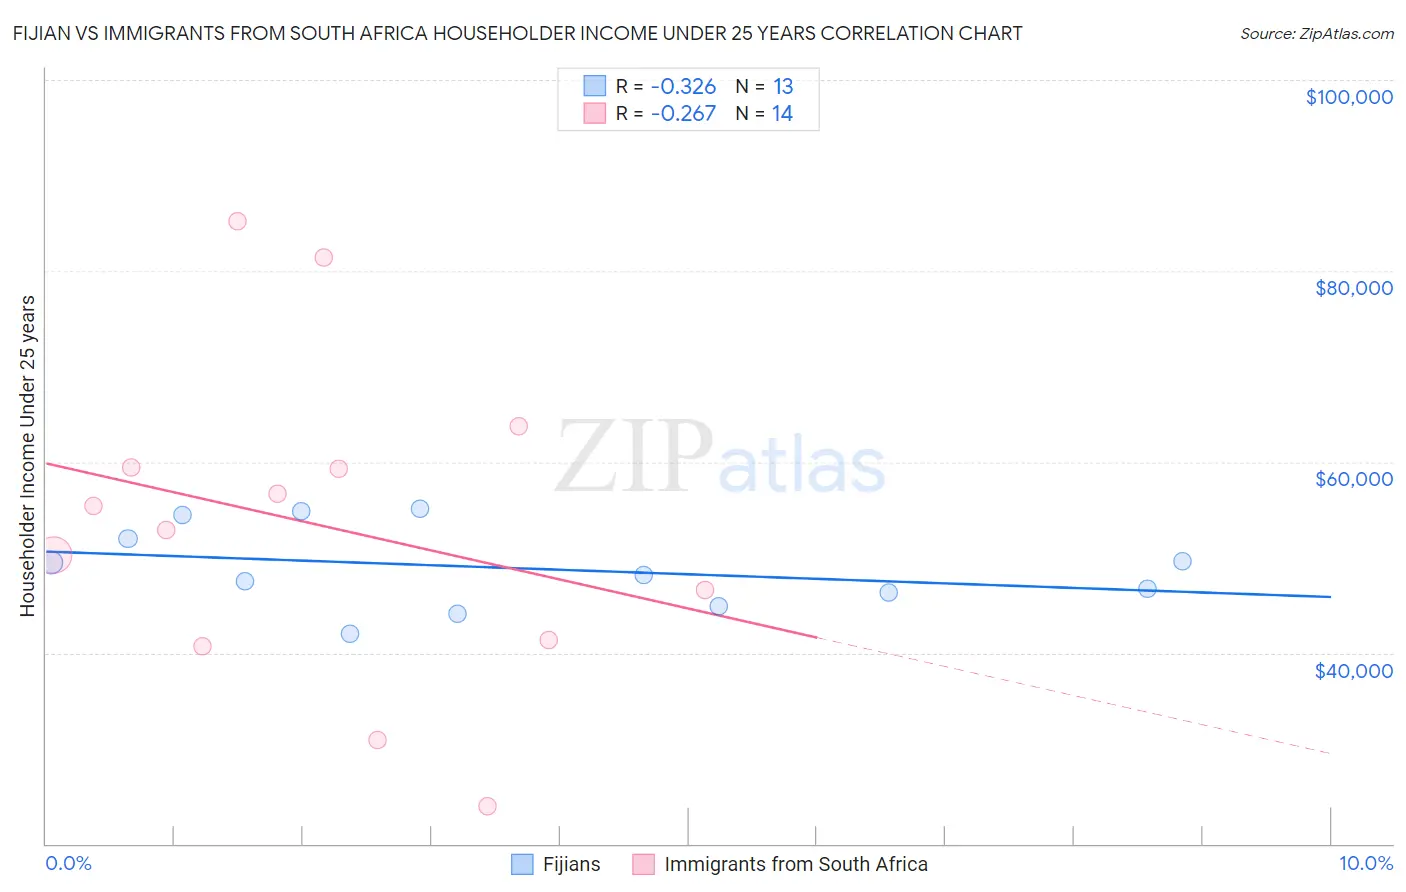 Fijian vs Immigrants from South Africa Householder Income Under 25 years